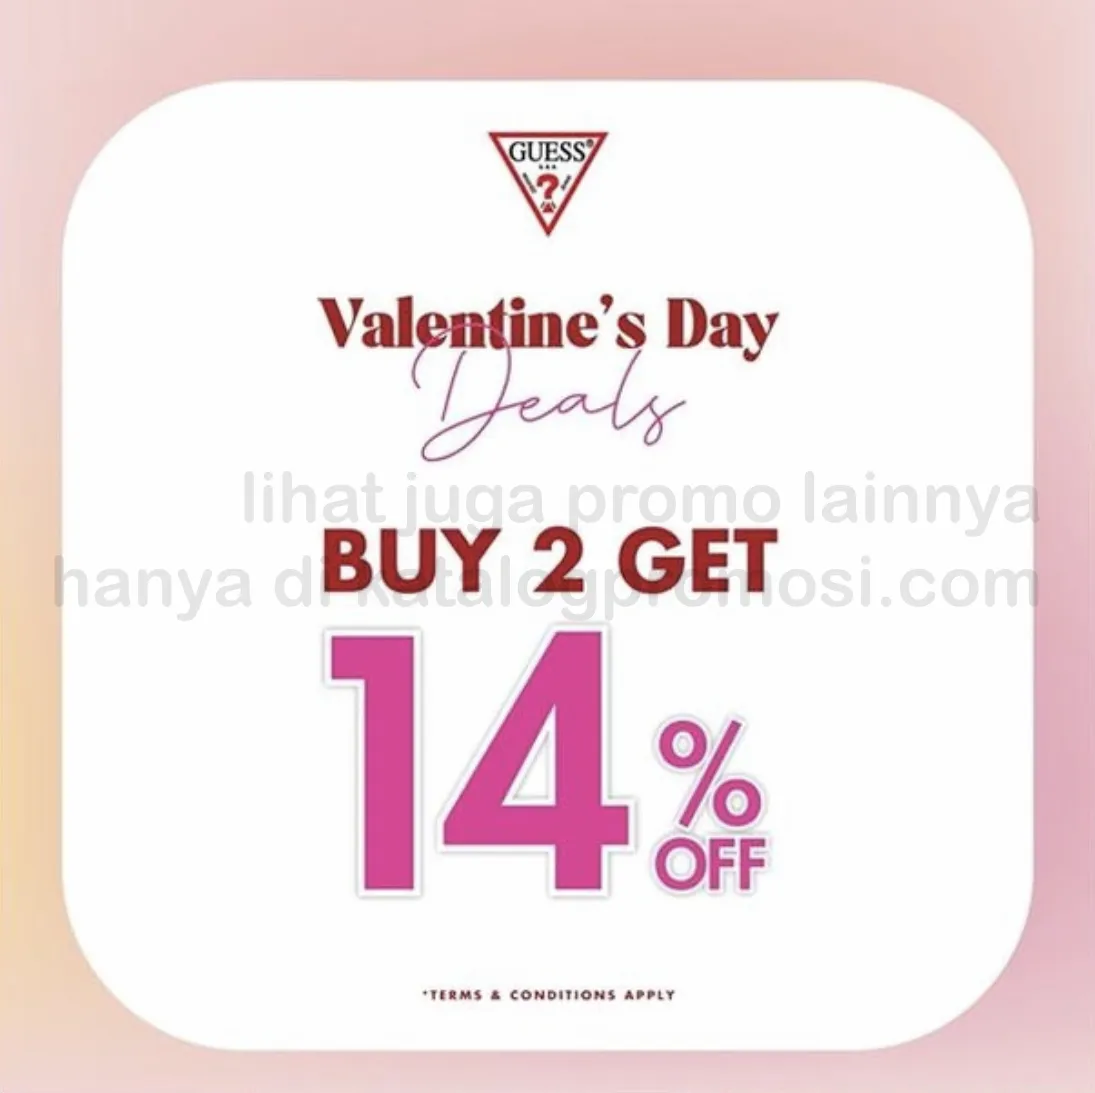 Promo GUESS VALENTINE'S DAY DEALS - BUY 2 GET 14% OFF